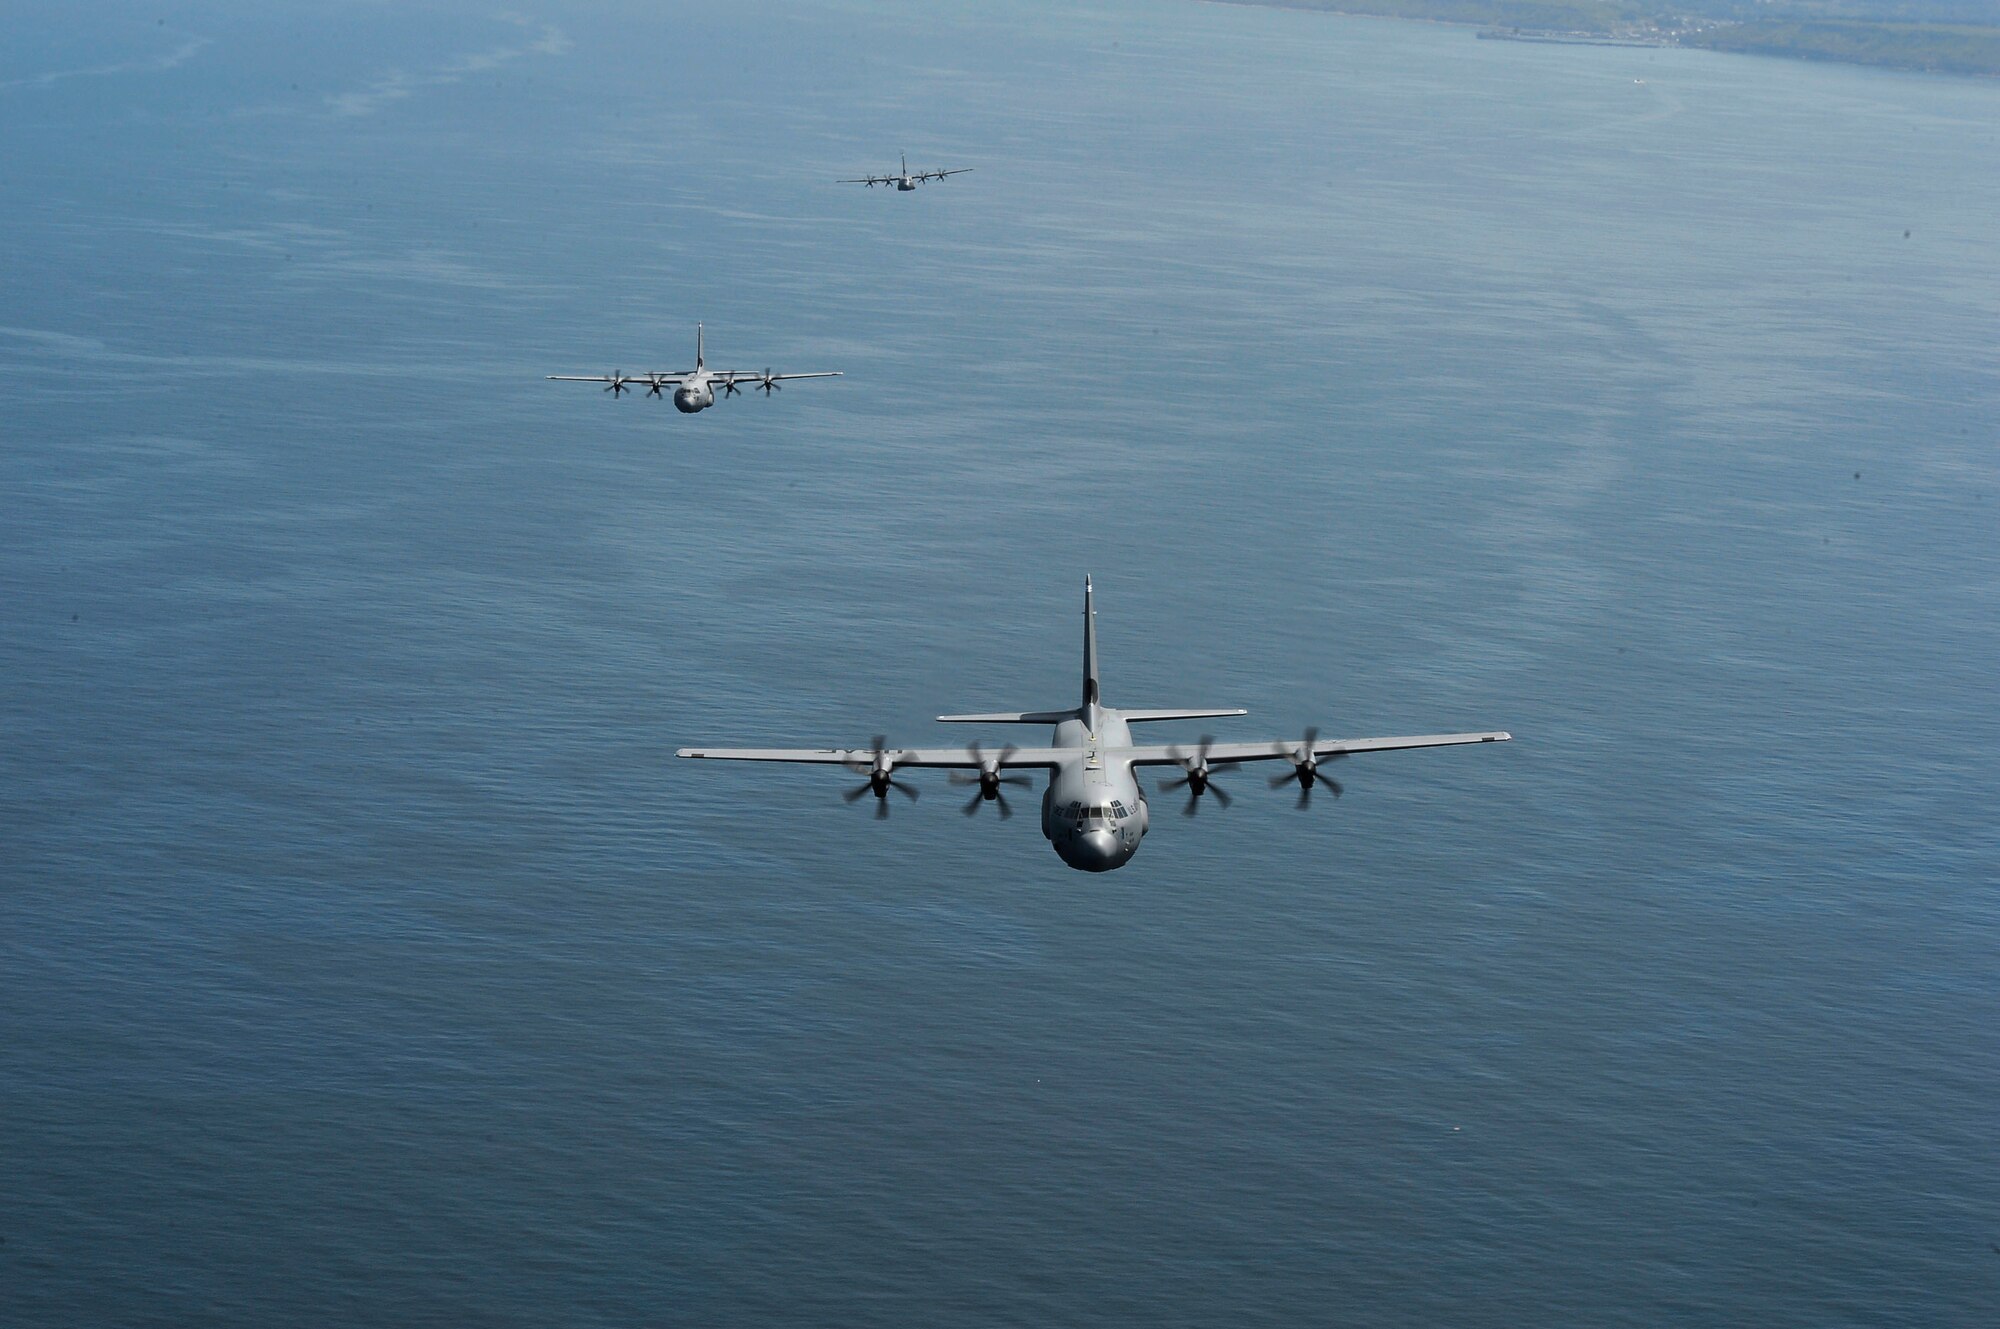 A formation of C-130J Super Hercules assigned to the 37th Airlift Squadron flies over the English Channel June 2, 2018. The 37th AS is a descendant unit of the 37th Troop Carrier Squadron, which dropped paratroopers over Normany on D-Day. (U.S. Air Force photo by Senior Airman Joshua Magbanua)